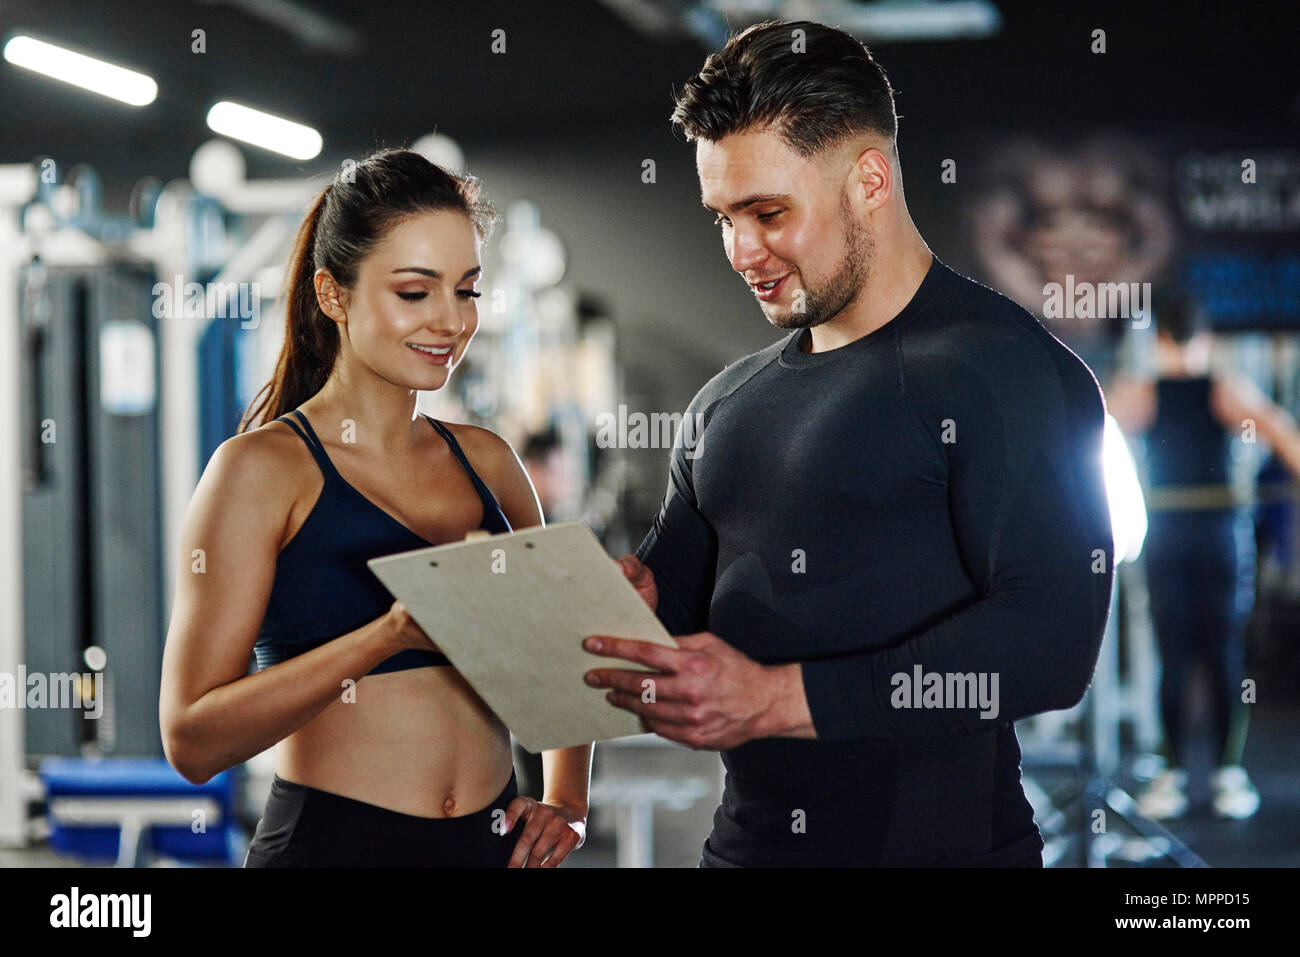 Personal trainer talking to woman in gym Stock Photo